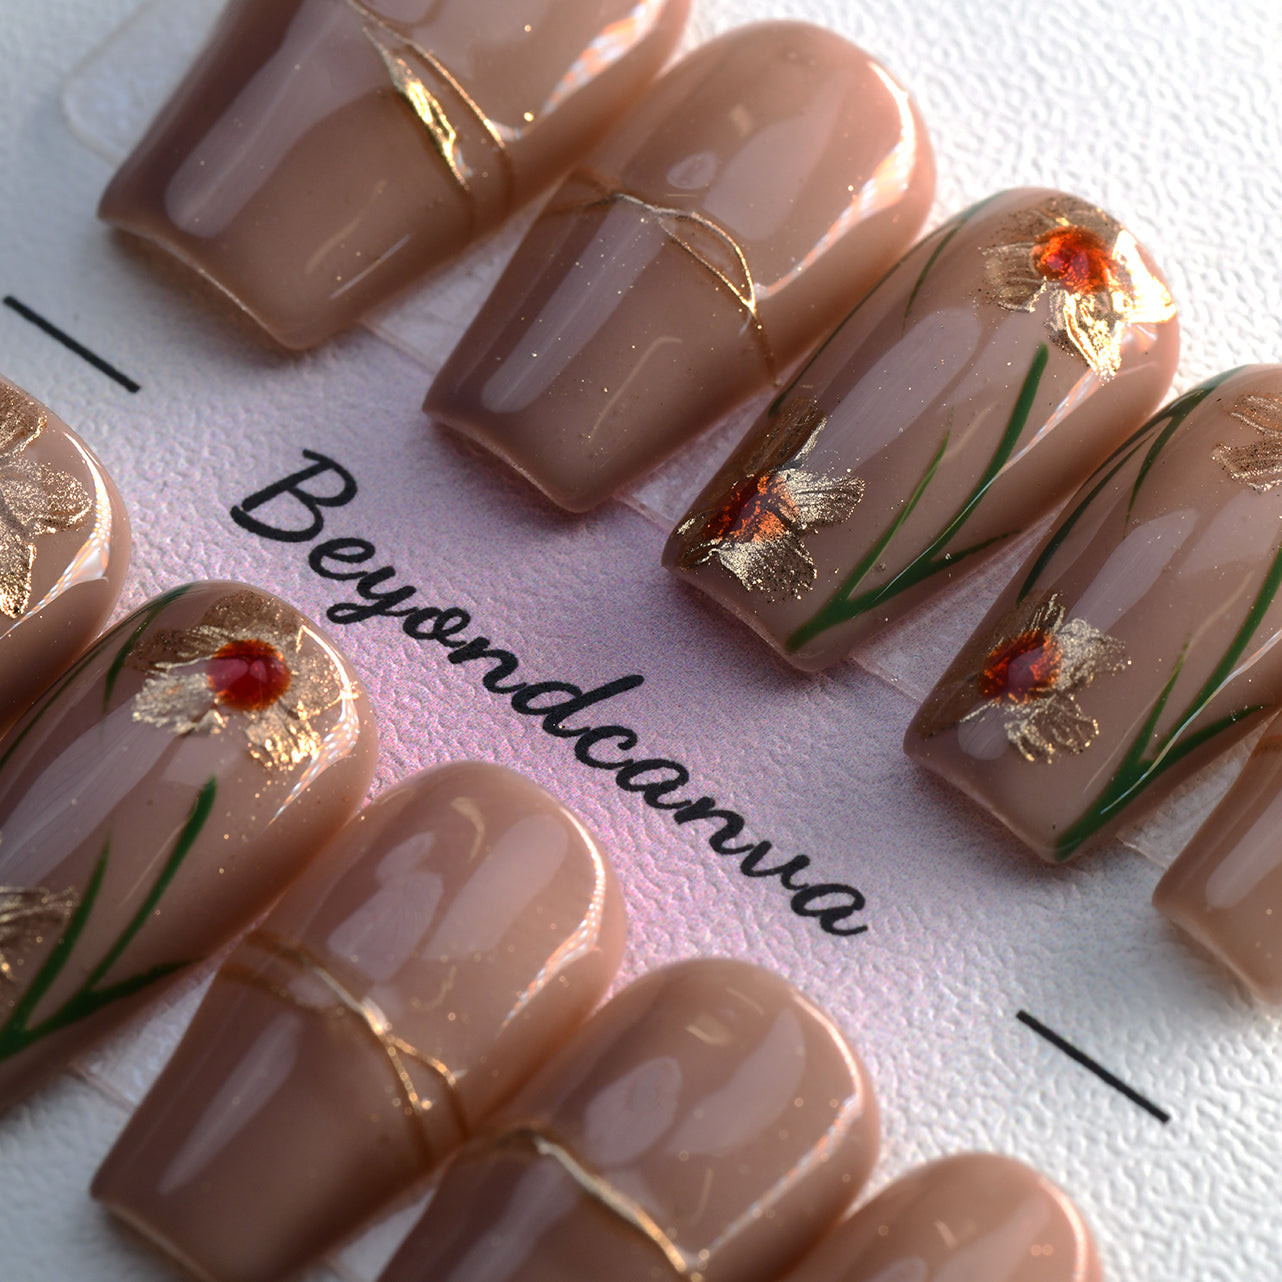 Glossy Brown Acrylic Glossy Medium Coffin Handmade Press On Nails With Floral Design-BEYONDCANVA